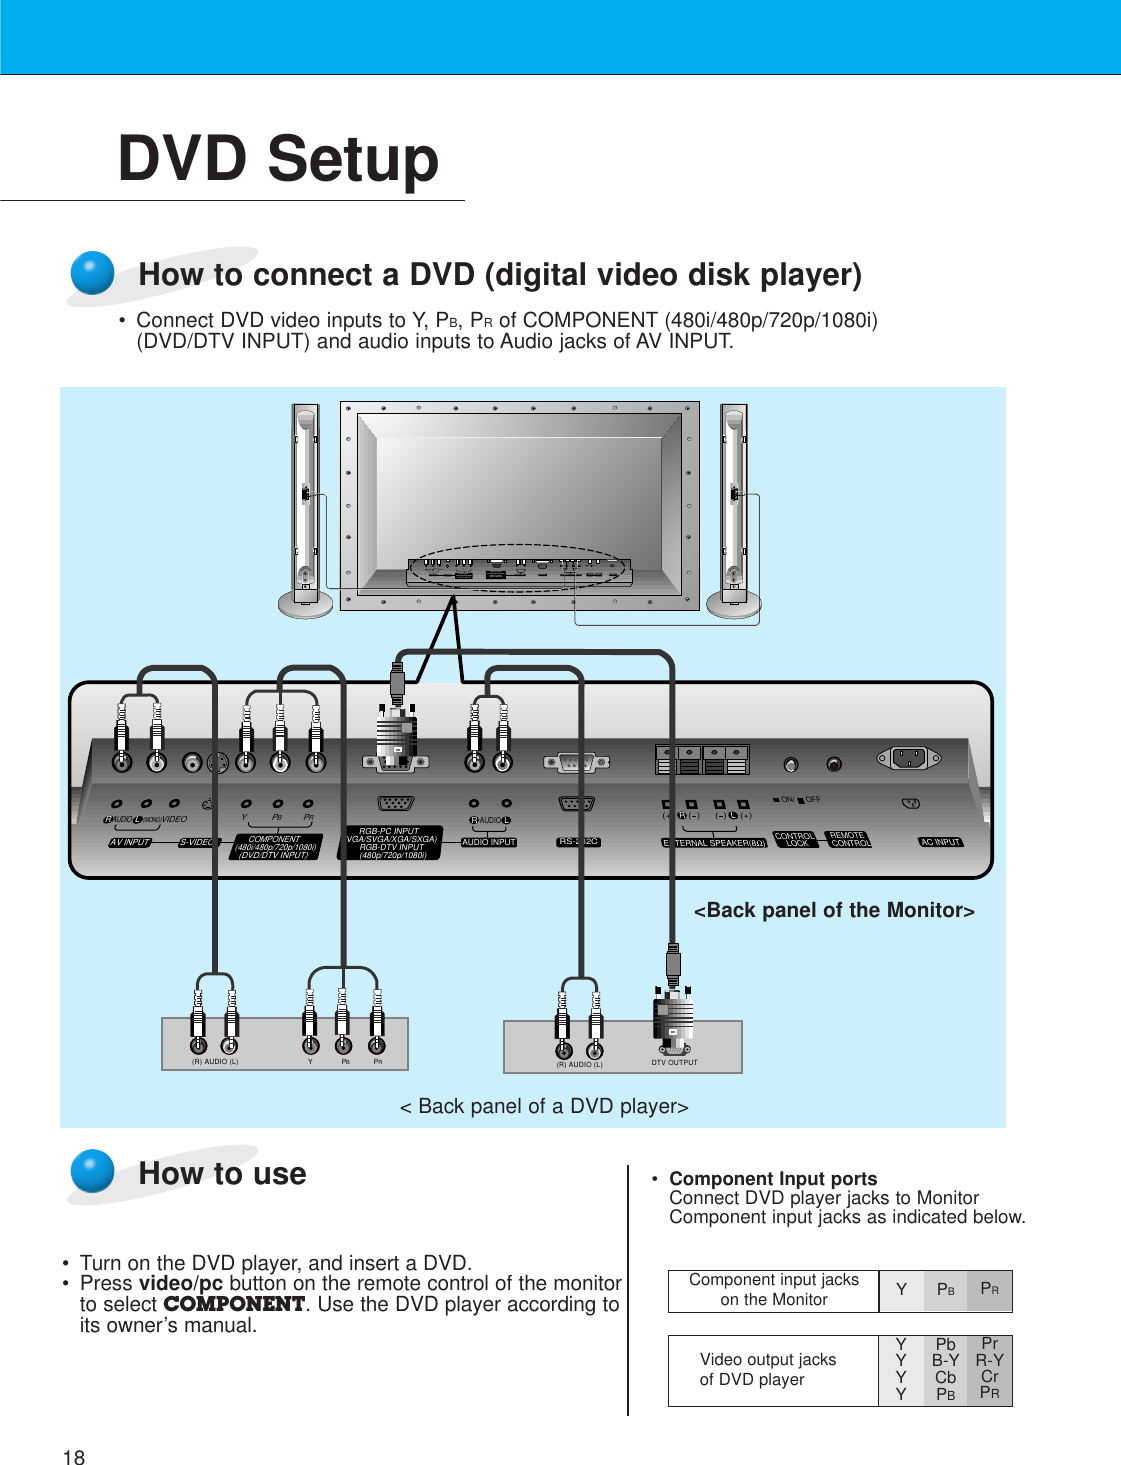 18DVD Setup• Connect DVD video inputs to Y, PB, PRof COMPONENT (480i/480p/720p/1080i)(DVD/DTV INPUT) and audio inputs to Audio jacks of AV INPUT.How to connect a DVD (digital video disk player)How to use• Turn on the DVD player, and insert a DVD.• Press video/pc button on the remote control of the monitorto select COMPONENT. Use the DVD player according toits owner’s manual.•Component Input portsConnect DVD player jacks to MonitorComponent input jacks as indicated below.(R) AUDIO (L)(R) AUDIO (L) Y PB RPDTV OUTPUT(+) (  ) (+)(  )AUDIO(MONO)R L VIDEO Y PB RPAV INPUTAUDIOR L RLEXTERNAL SPEAKER (8Ω) AC INPUTAUDIO INPUTS-VIDEO COMPONENT(480i/480p/720p/1080i)RGB-PC INPUT(VGA/SVGA/XGA/SXGA)RGB-DTV INPUT(480p/720p/1080i)(DVD/DTV INPUT)(+) (  ) (+)(  )AUDIO(MONO)R LAV INPUT S-VIDEOCOMPONENT(480i/480p/720p/1080i)(DVD/DTV INPUT)RGB-PC INPUTRAUDIO INPUTEXTERNAL SPEAKER(8Ω)R LAC INPUTLAUDIO(VGA/SVGA/XGA/SXGA)RGB-DTV INPUT(480p/720p/1080i)VIDEO Y PBPRRS-232CRS-232CCONTROLLOCK REMOTECONTROLREMOTECONTROLCONTROLLOCKON/ OFFON/ OFF&lt; Back panel of a DVD player&gt;Component input jacks on the Monitor YPBPRVideo output jacks of DVD playerYYYYPbB-YCbPBPrR-YCrPR&lt;Back panel of the Monitor&gt;